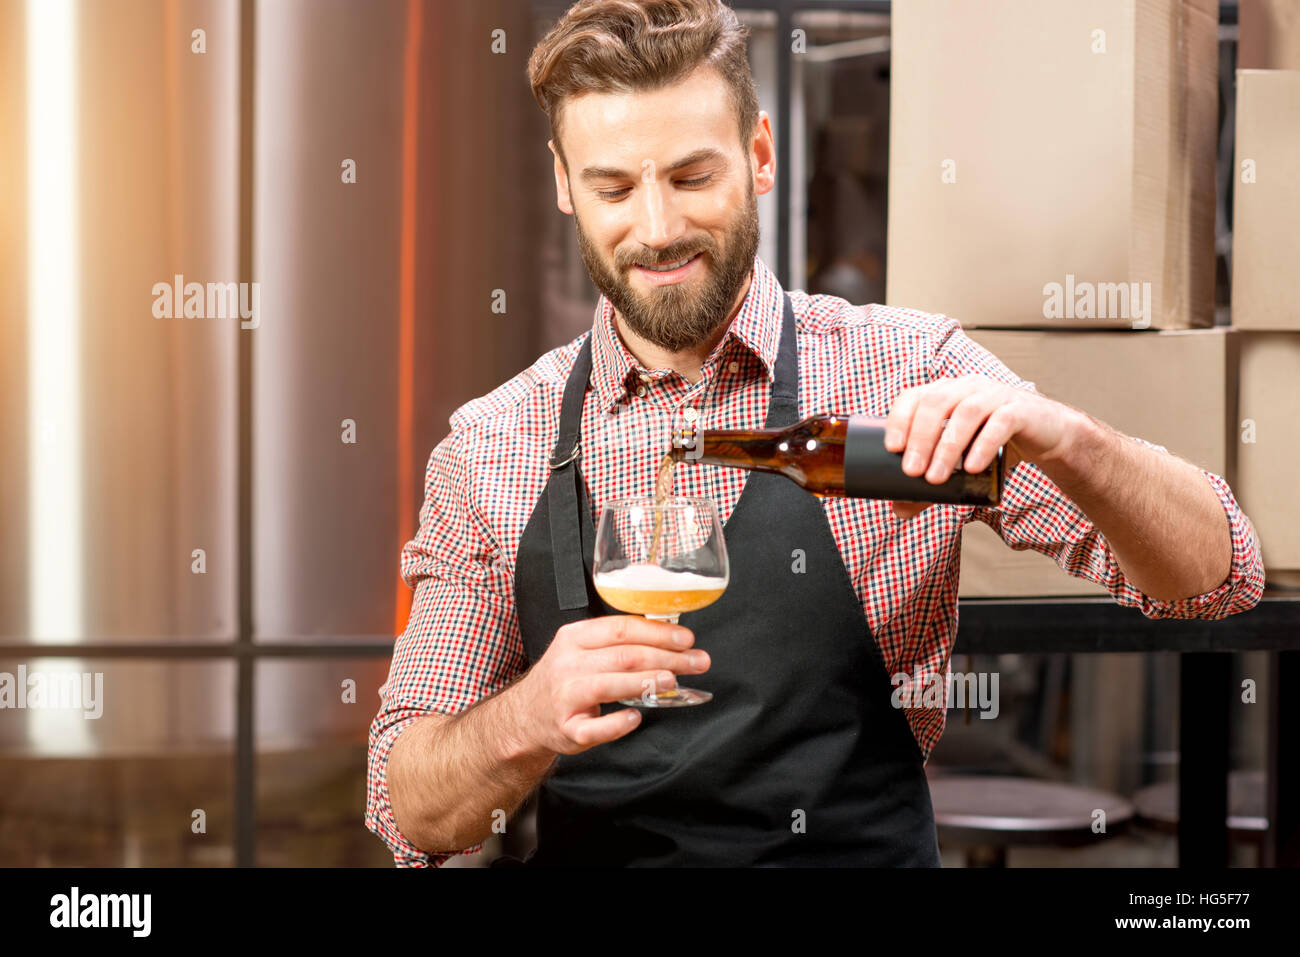 Brewer pouring beer Stock Photo